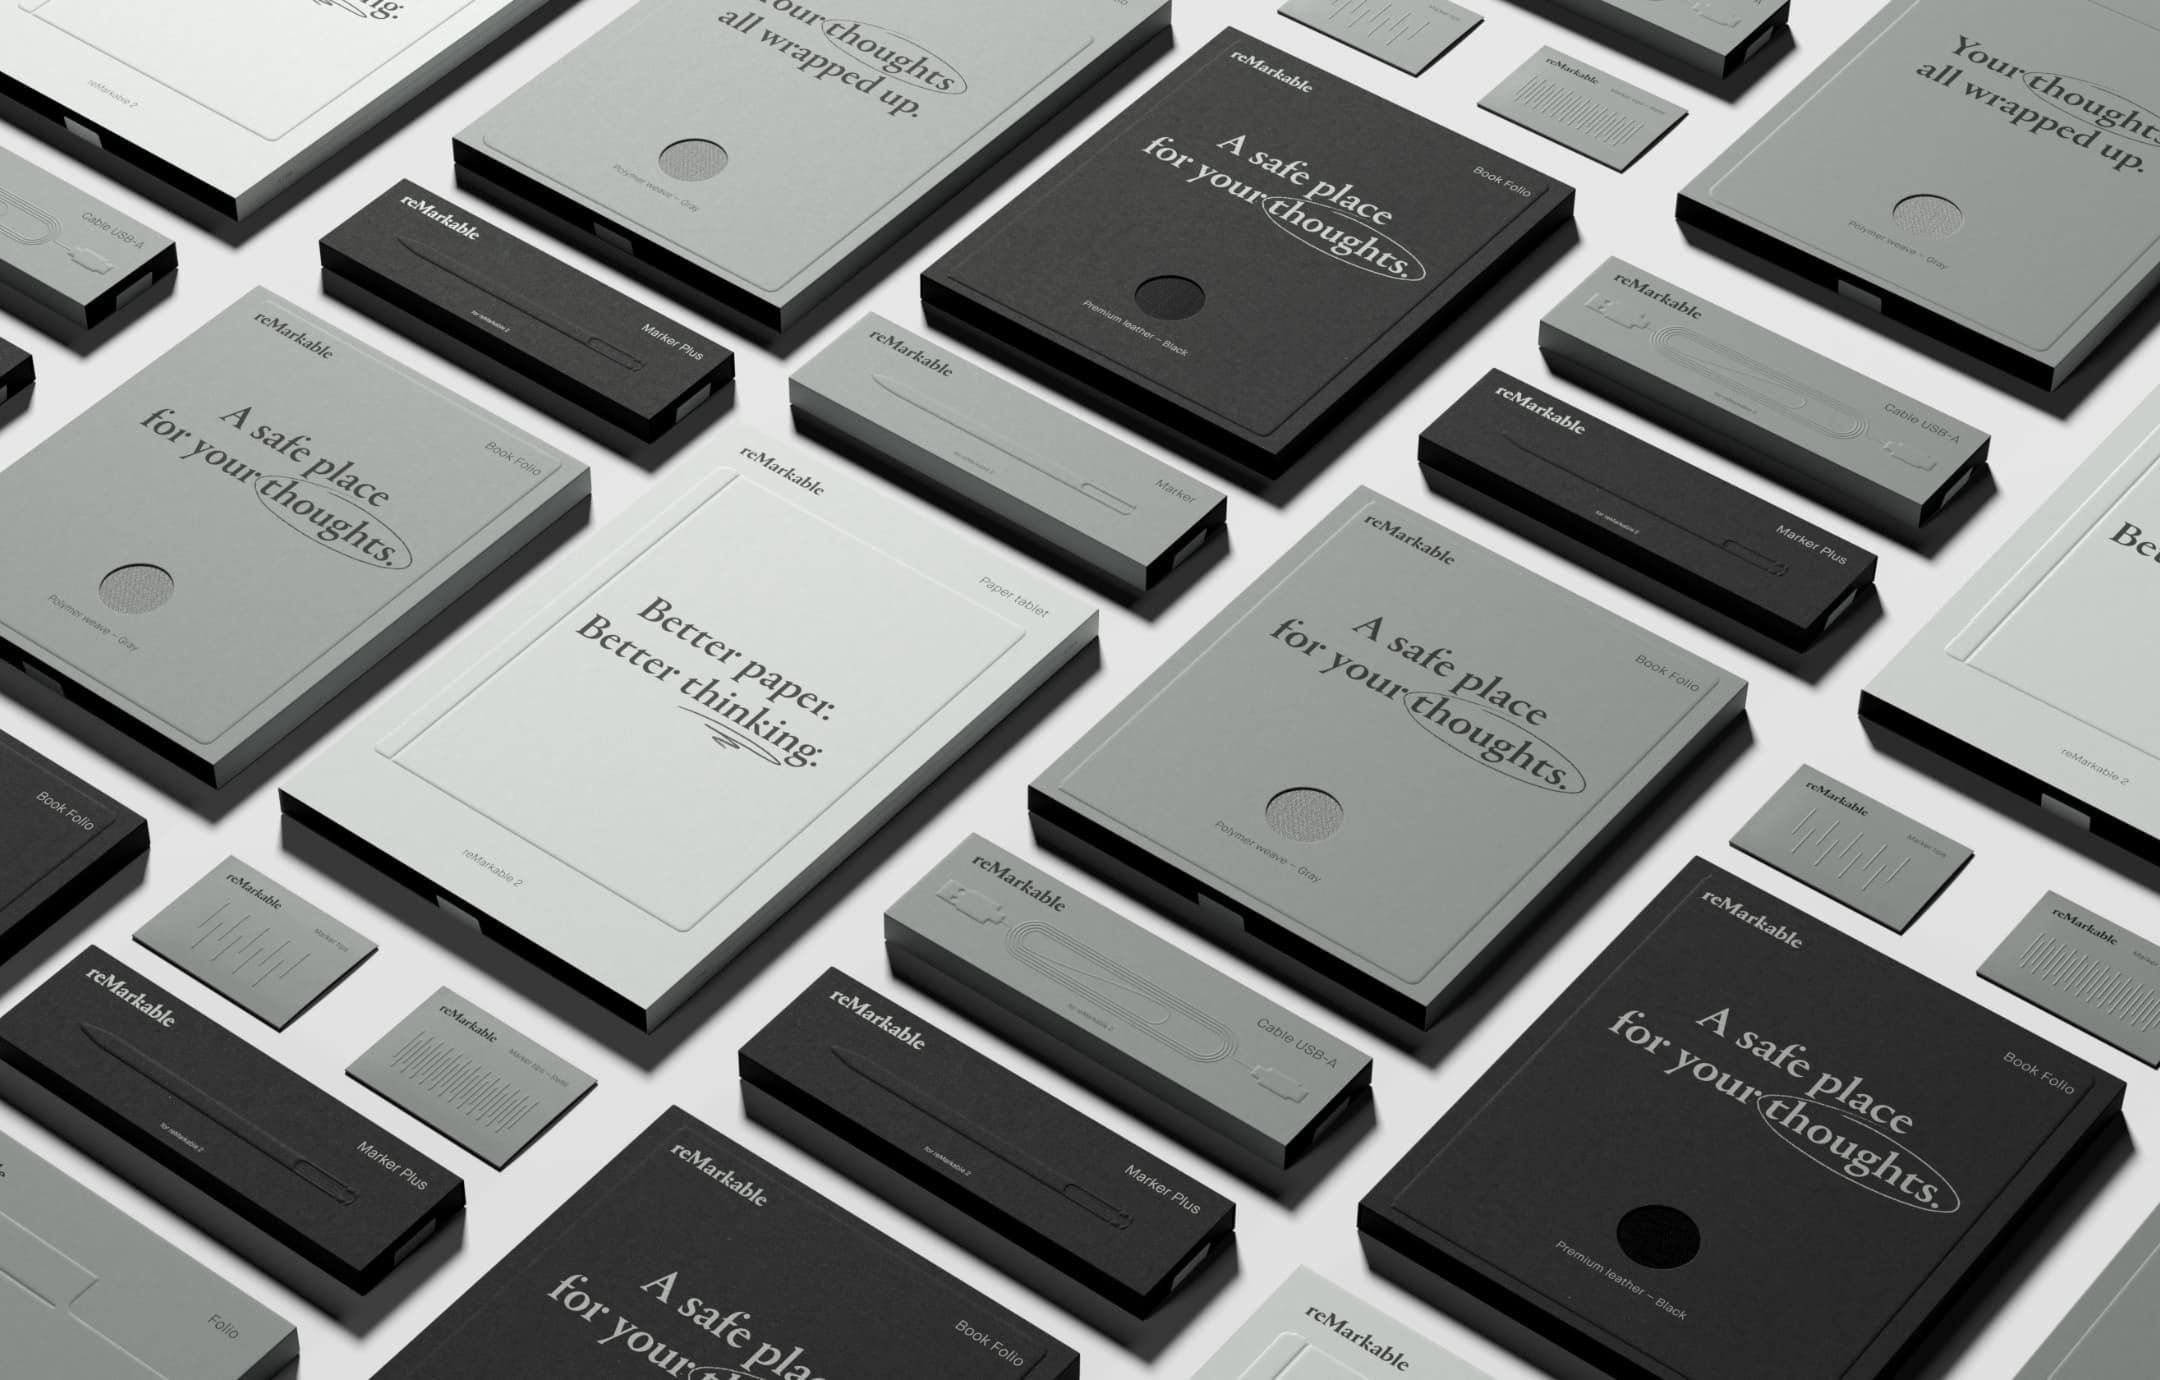 Photo depicting the full range of reMarkable packaging in shades of gray. These minimal rectangular packages feature embossed highlights and black text.